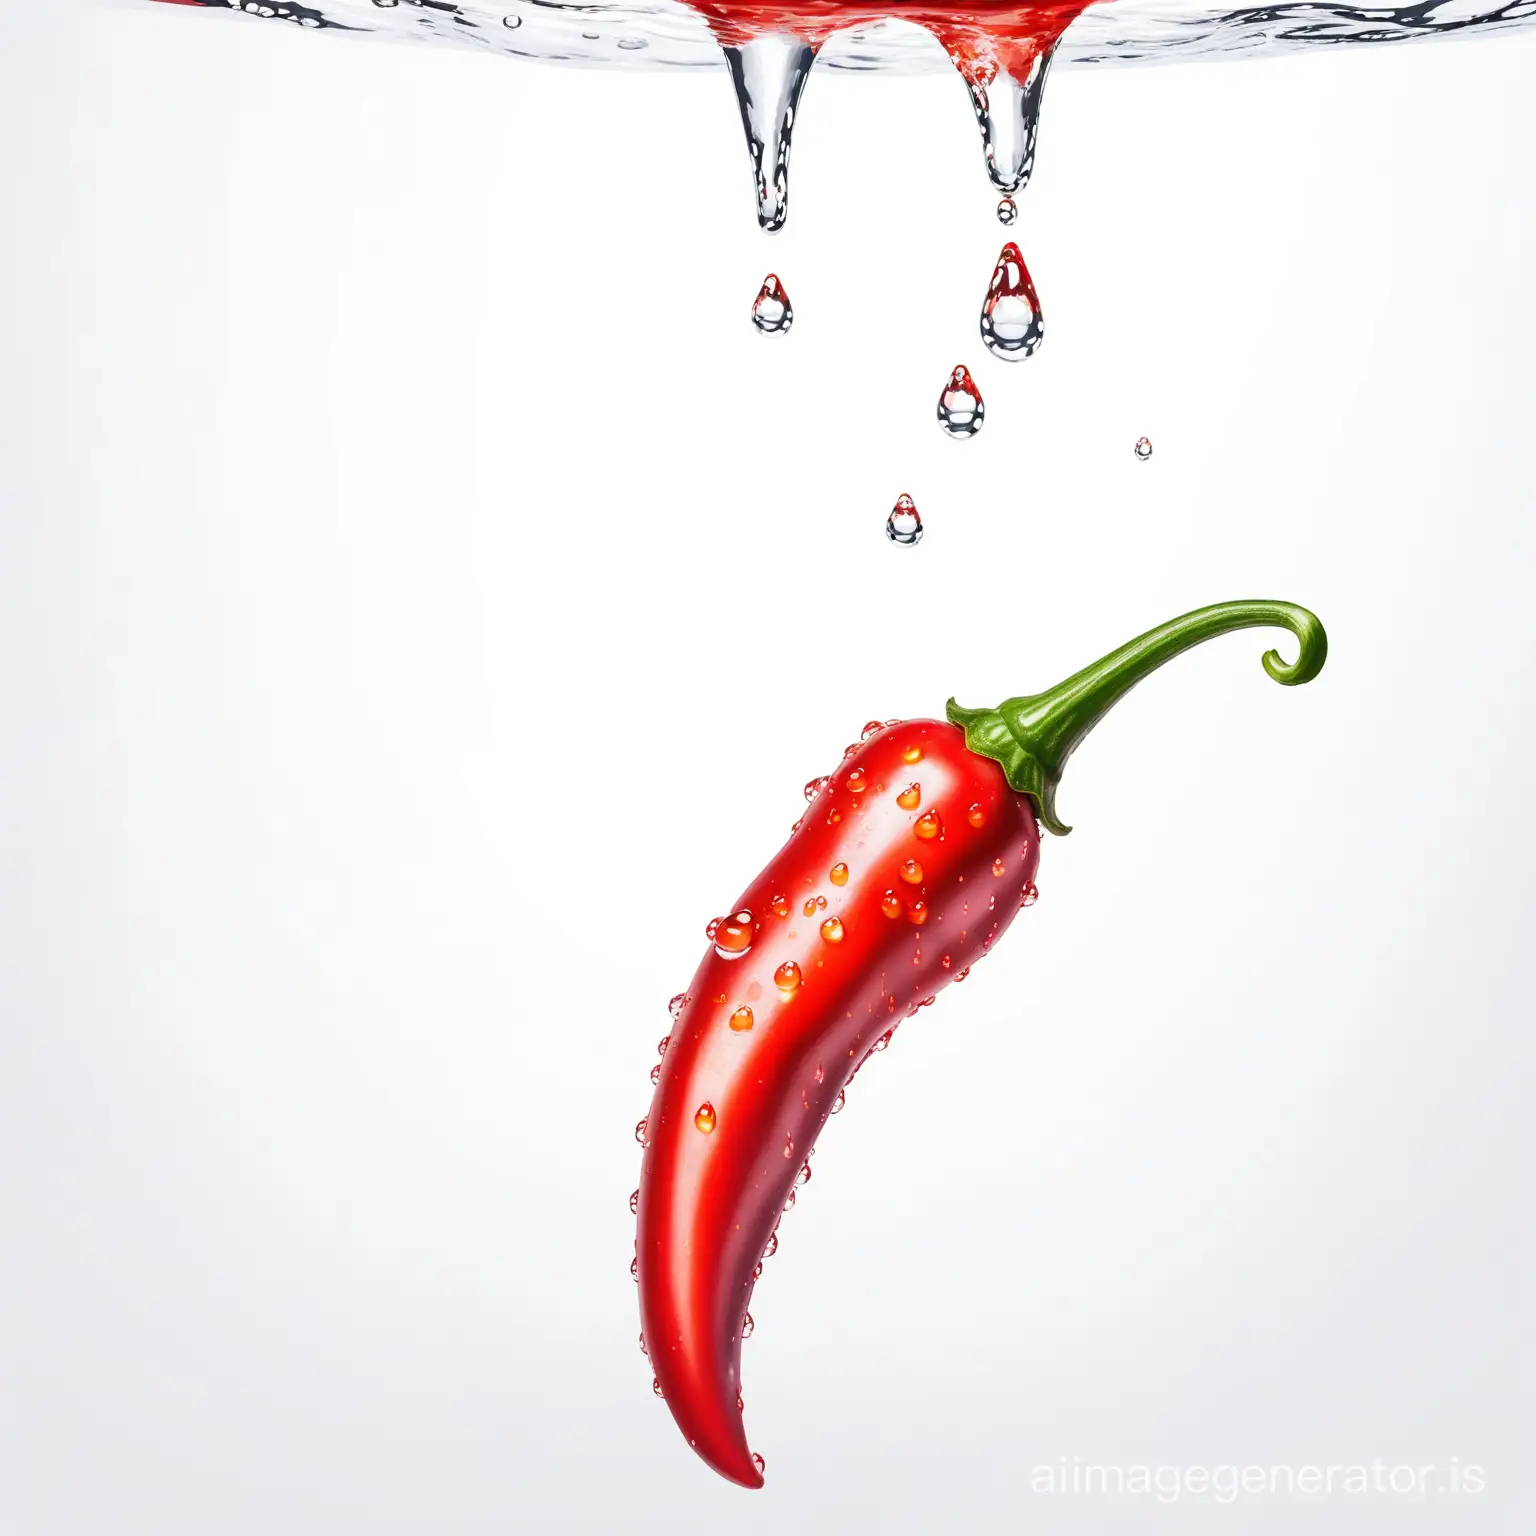 red hot pepper in white background isolated. drops of water